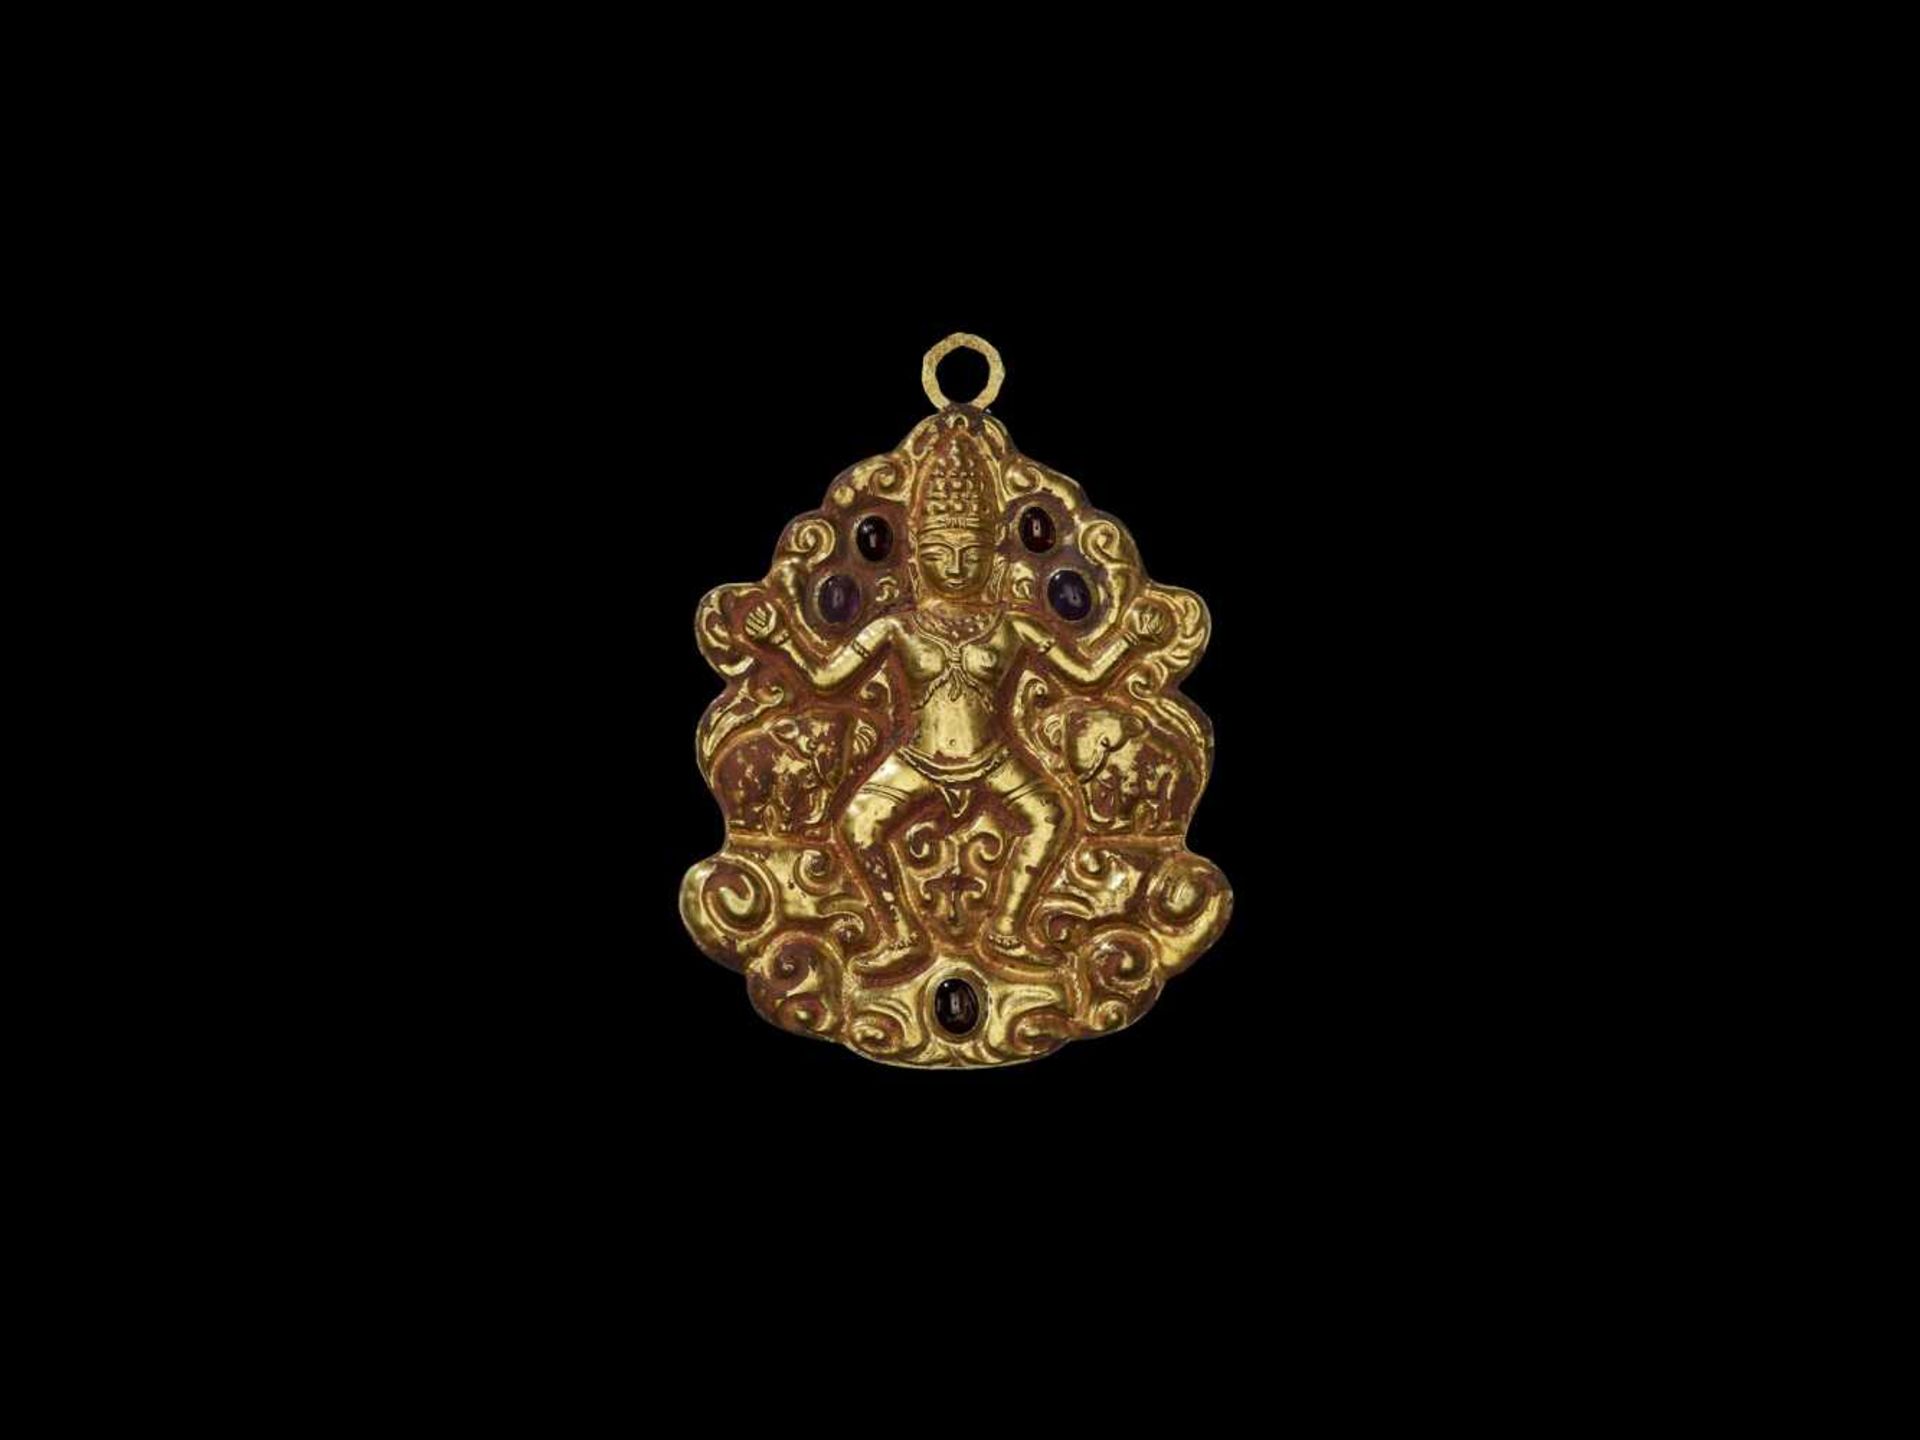 A RARE CHAM REPOUSSÉ GOLD PENDANT WITH DANCING INDRA AND ELEPHANTS Central Cham kingdom, classical